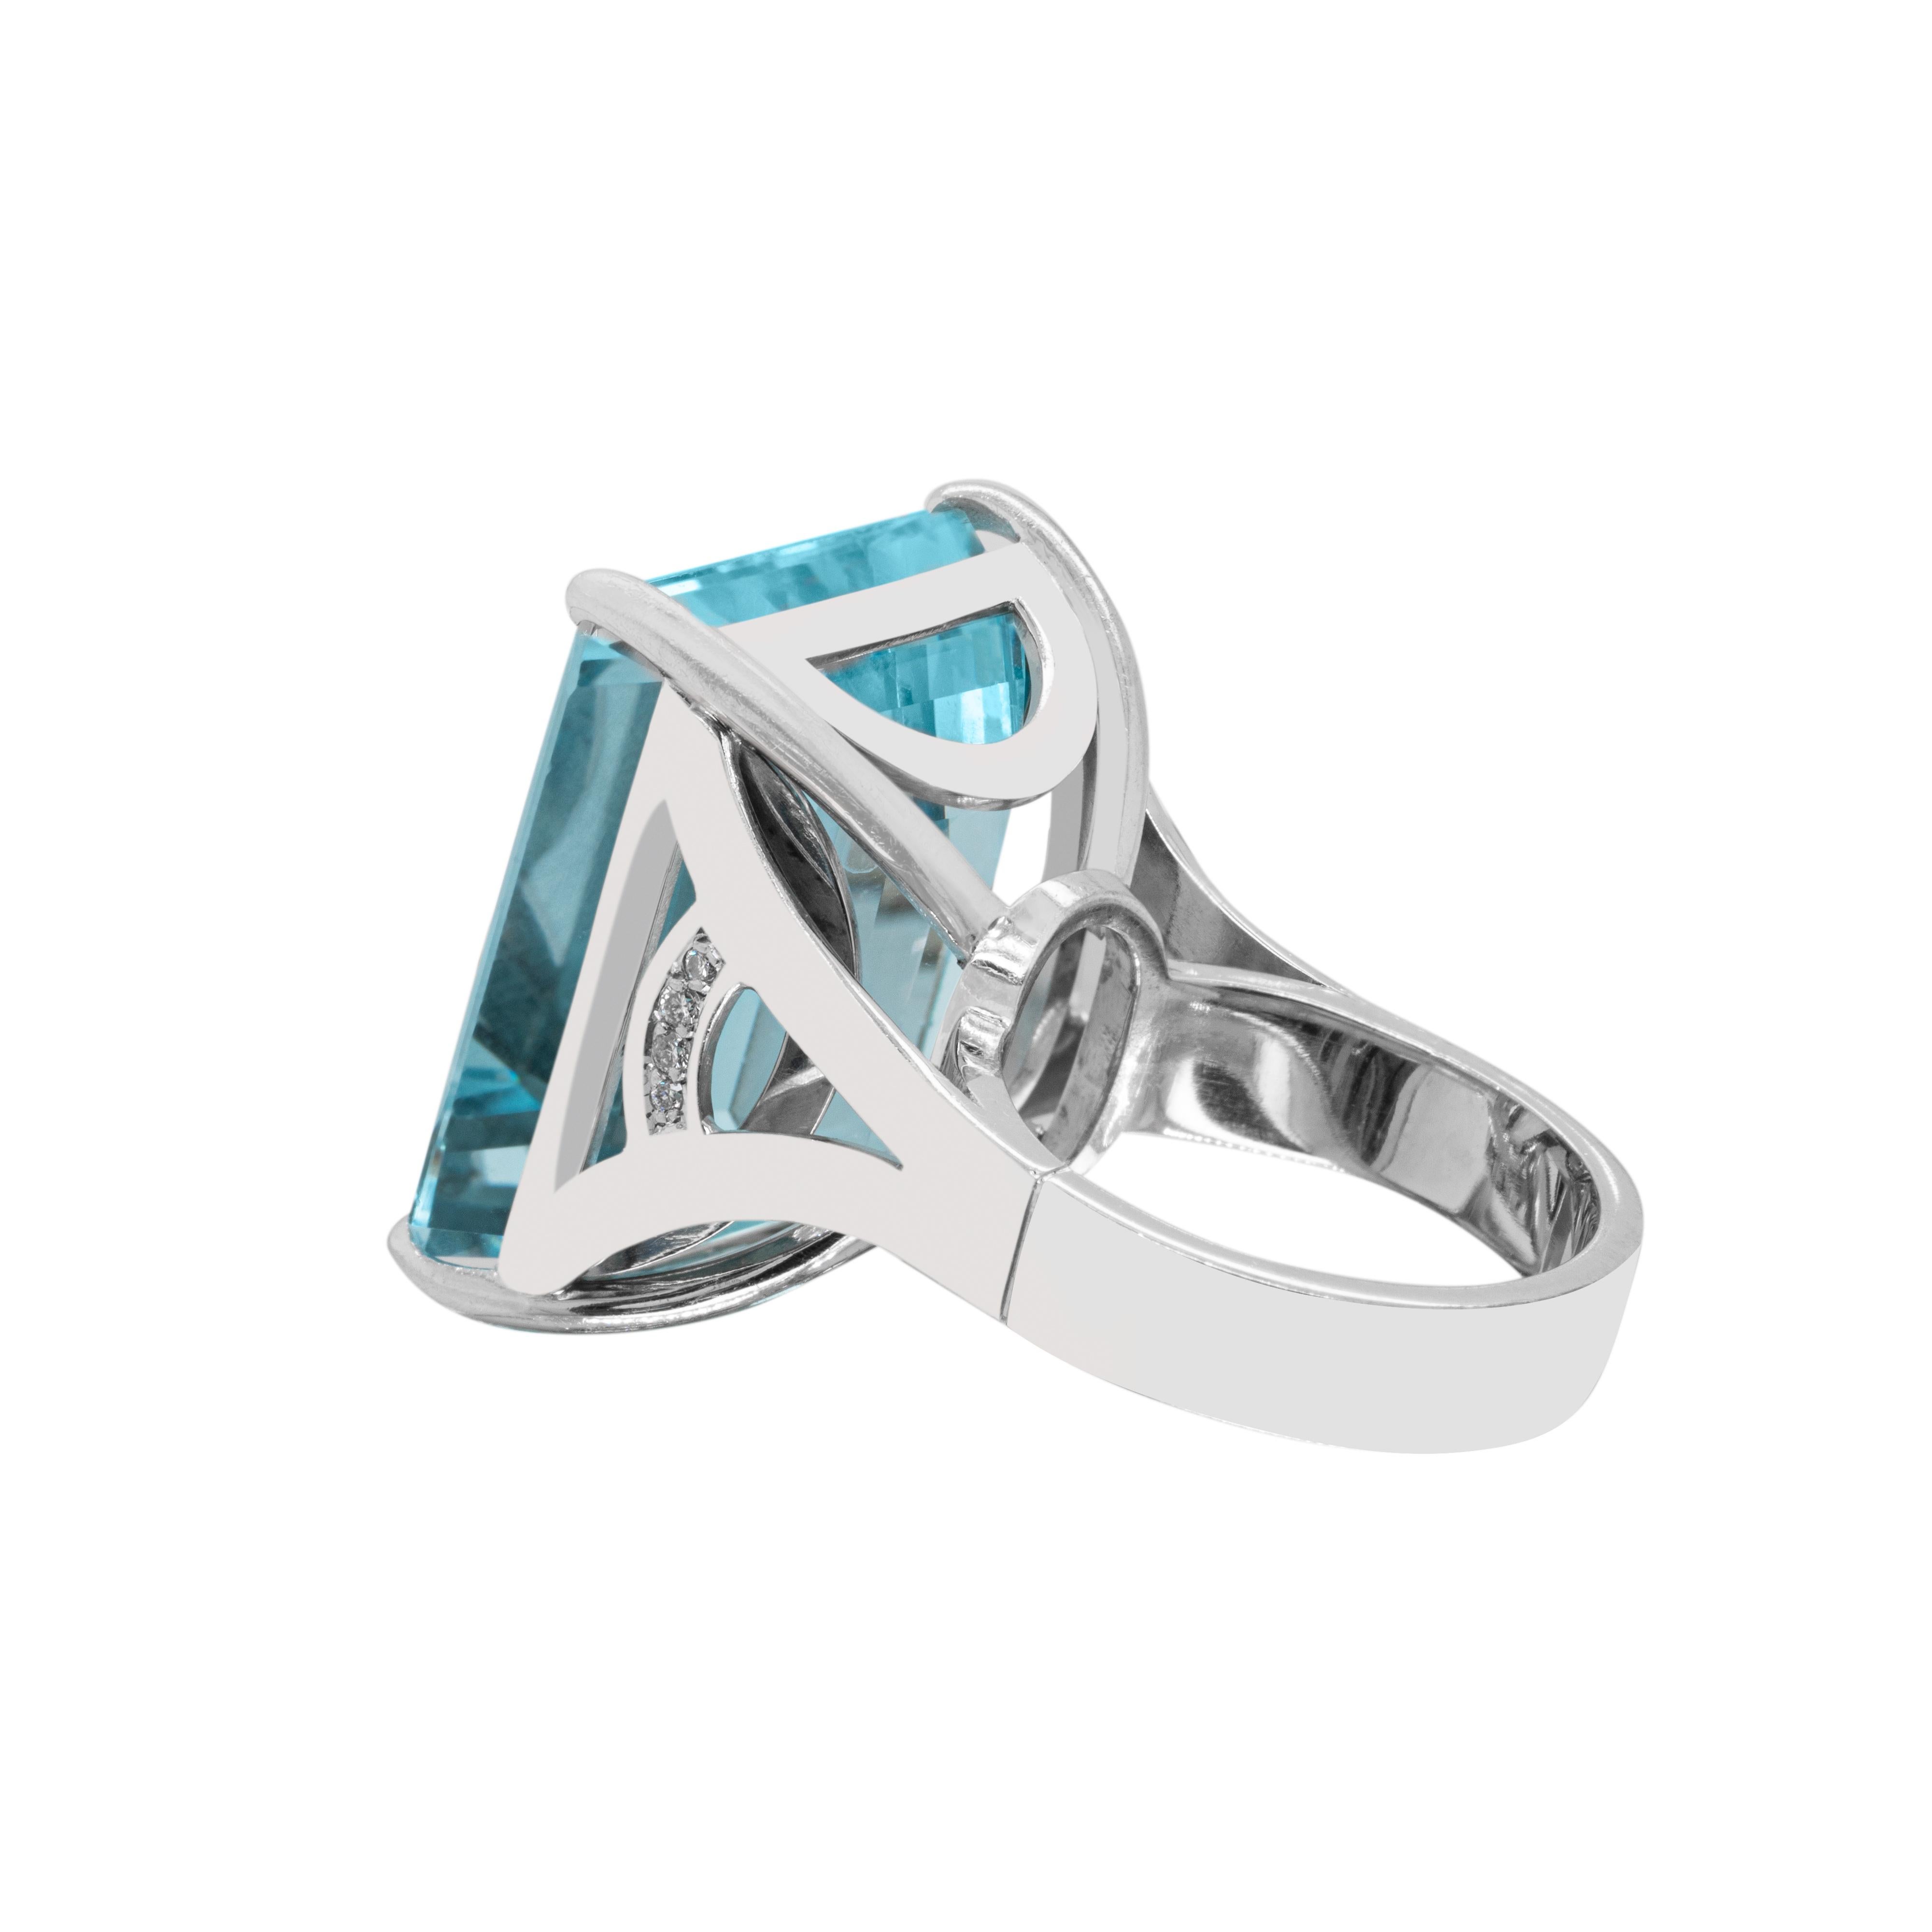 This magnificent ring features a vibrant emerald cut aquamarine weighing an impressive 35.72 carats mounted in a four claw, open back setting. The gallery is set with 4 round brilliant cut diamonds on either side of the aquamarine weighing